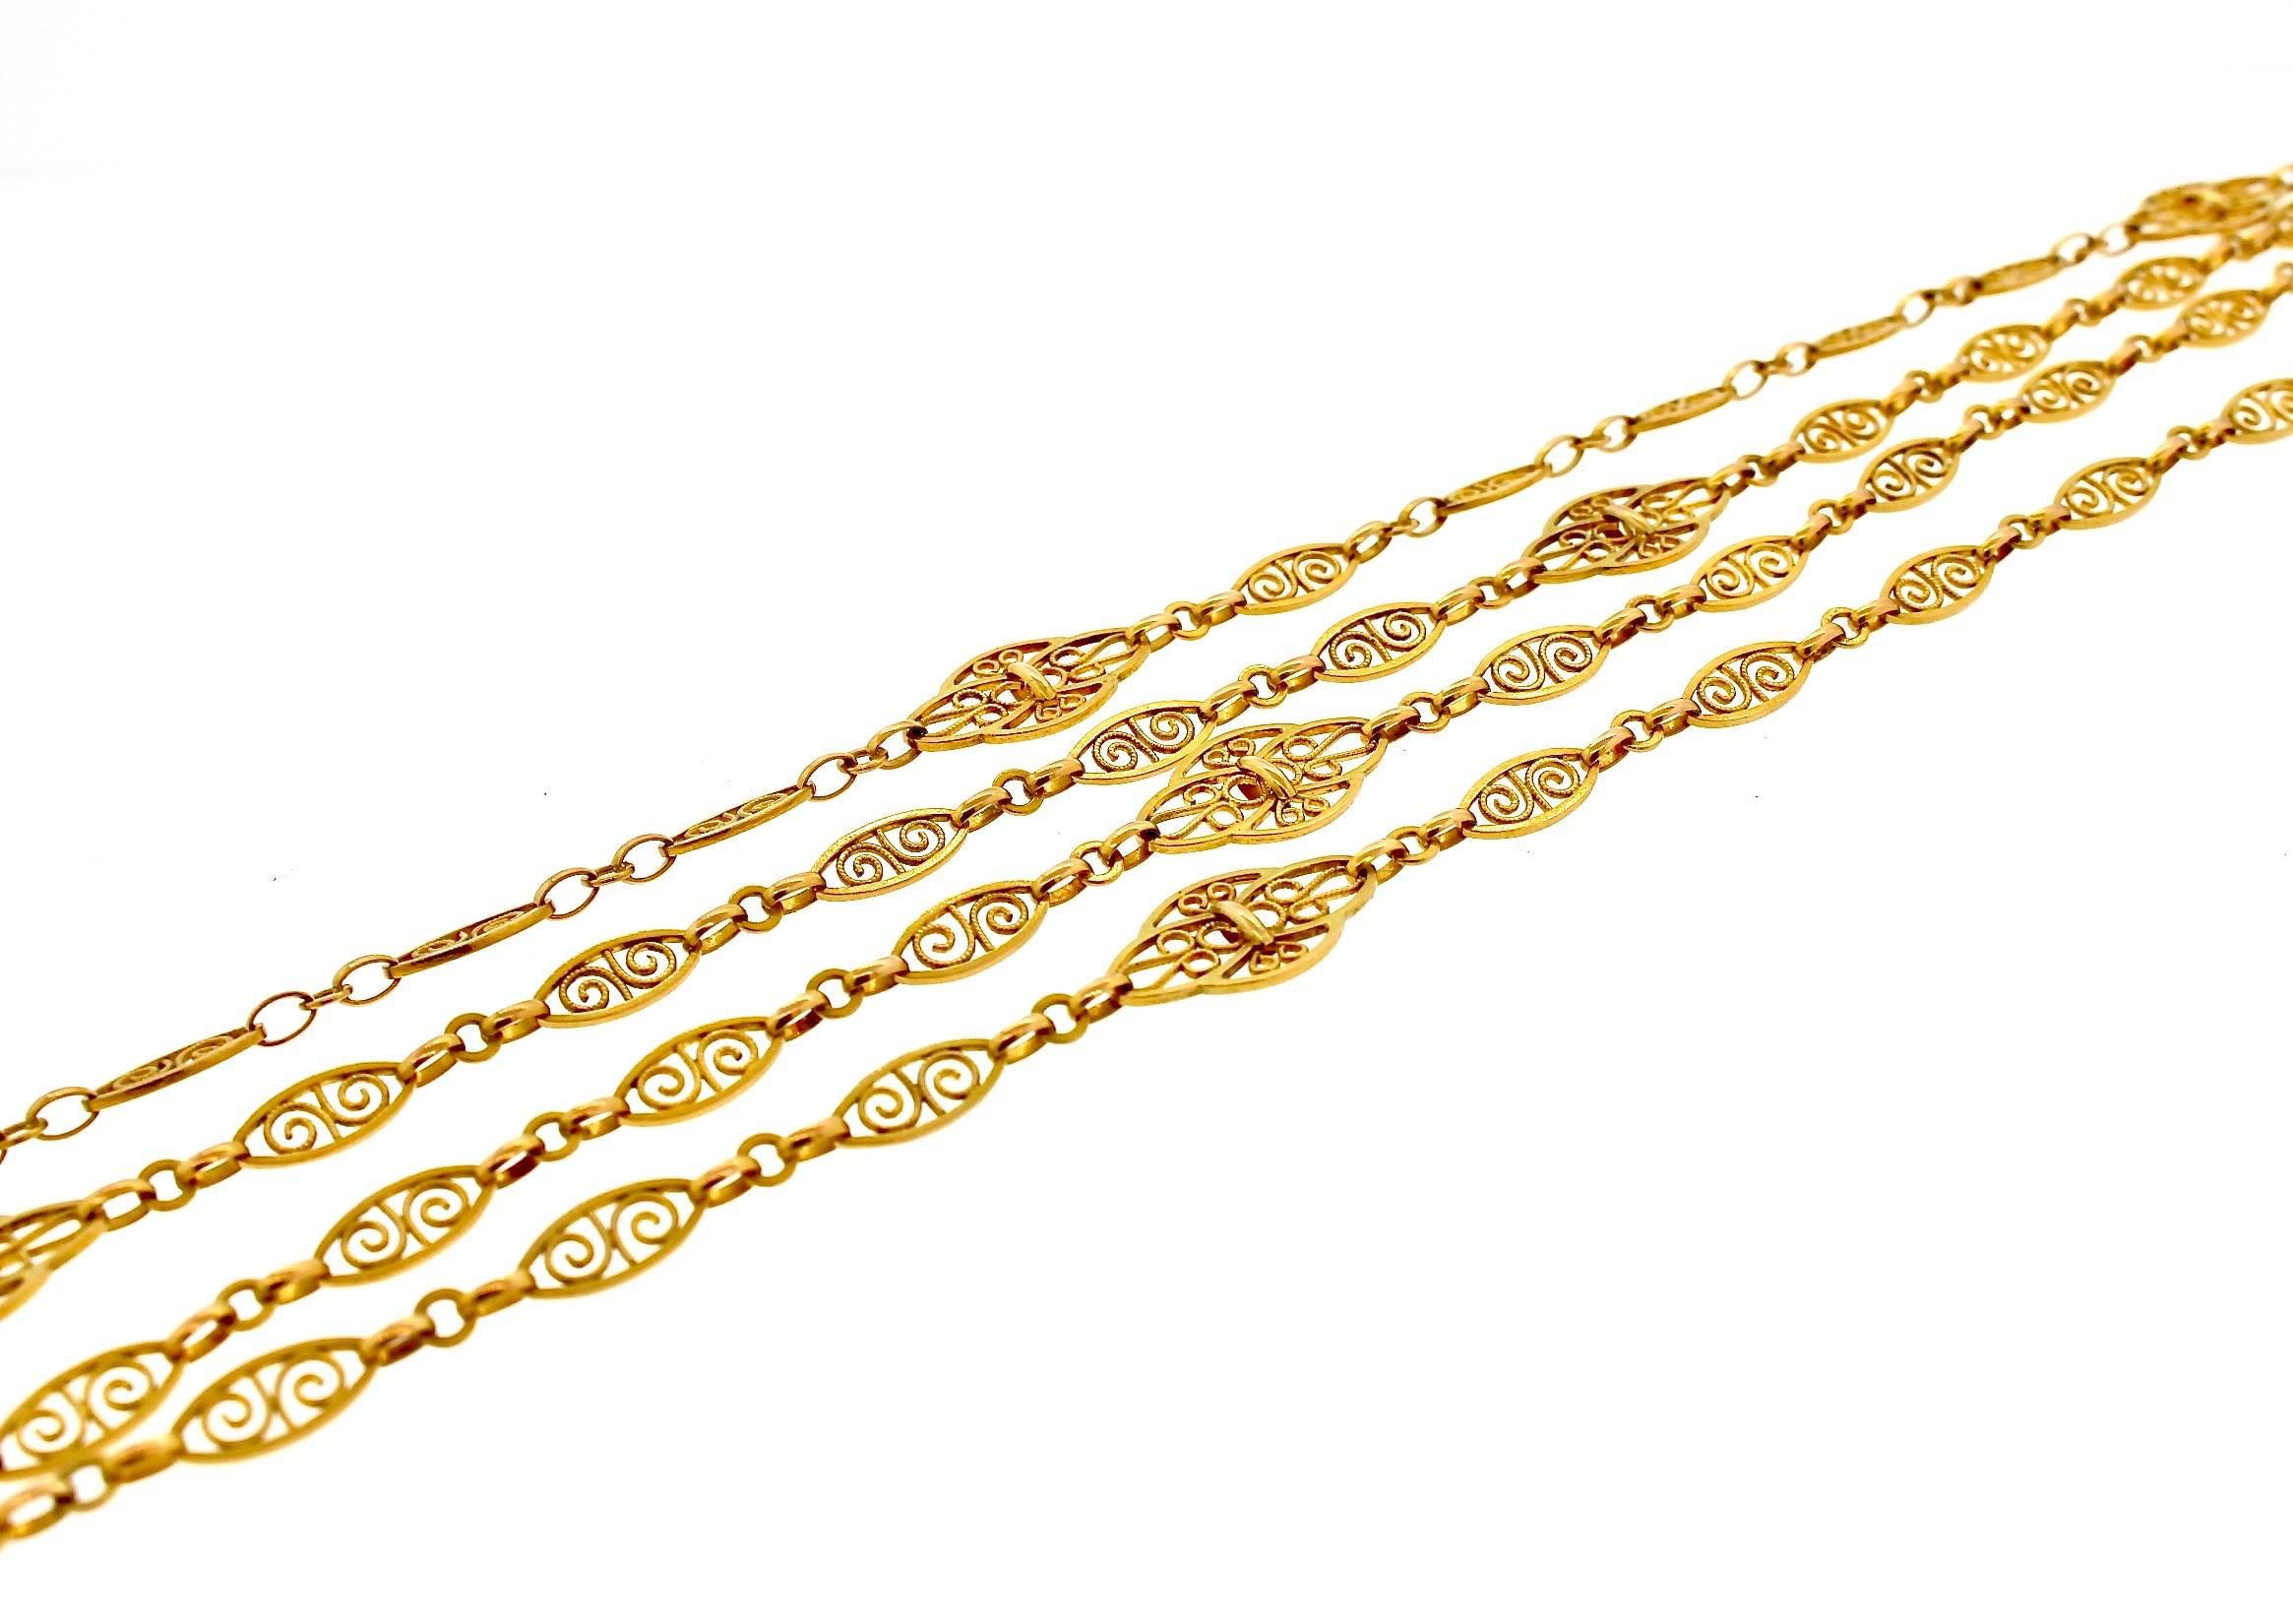 Long gold chains are useful and versatile.  It can be worn doubled up on its own or suspending a striking pendant.  Victorian filigree chains such as these have such pretty twisted gold and polished gold links that it is sure to compliment any